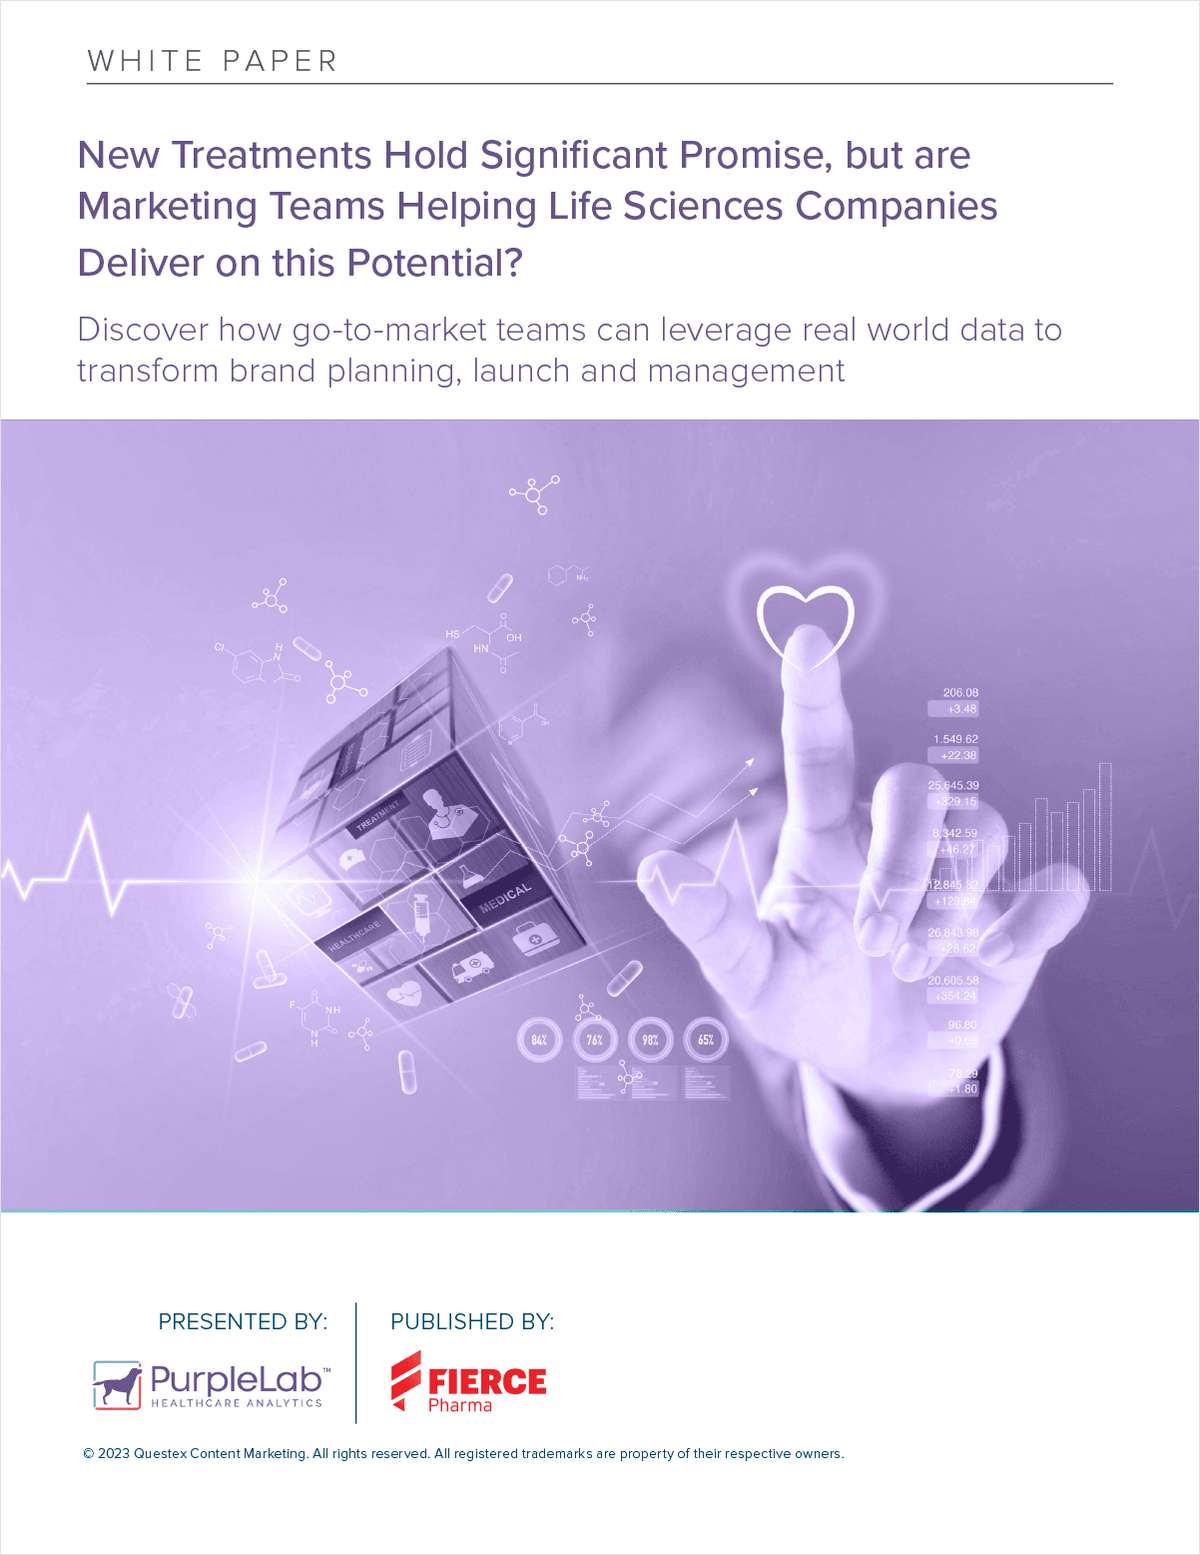 New Treatments Hold Significant Promise, but are Marketing Teams Helping Life Sciences Companies Deliver on this Potential?